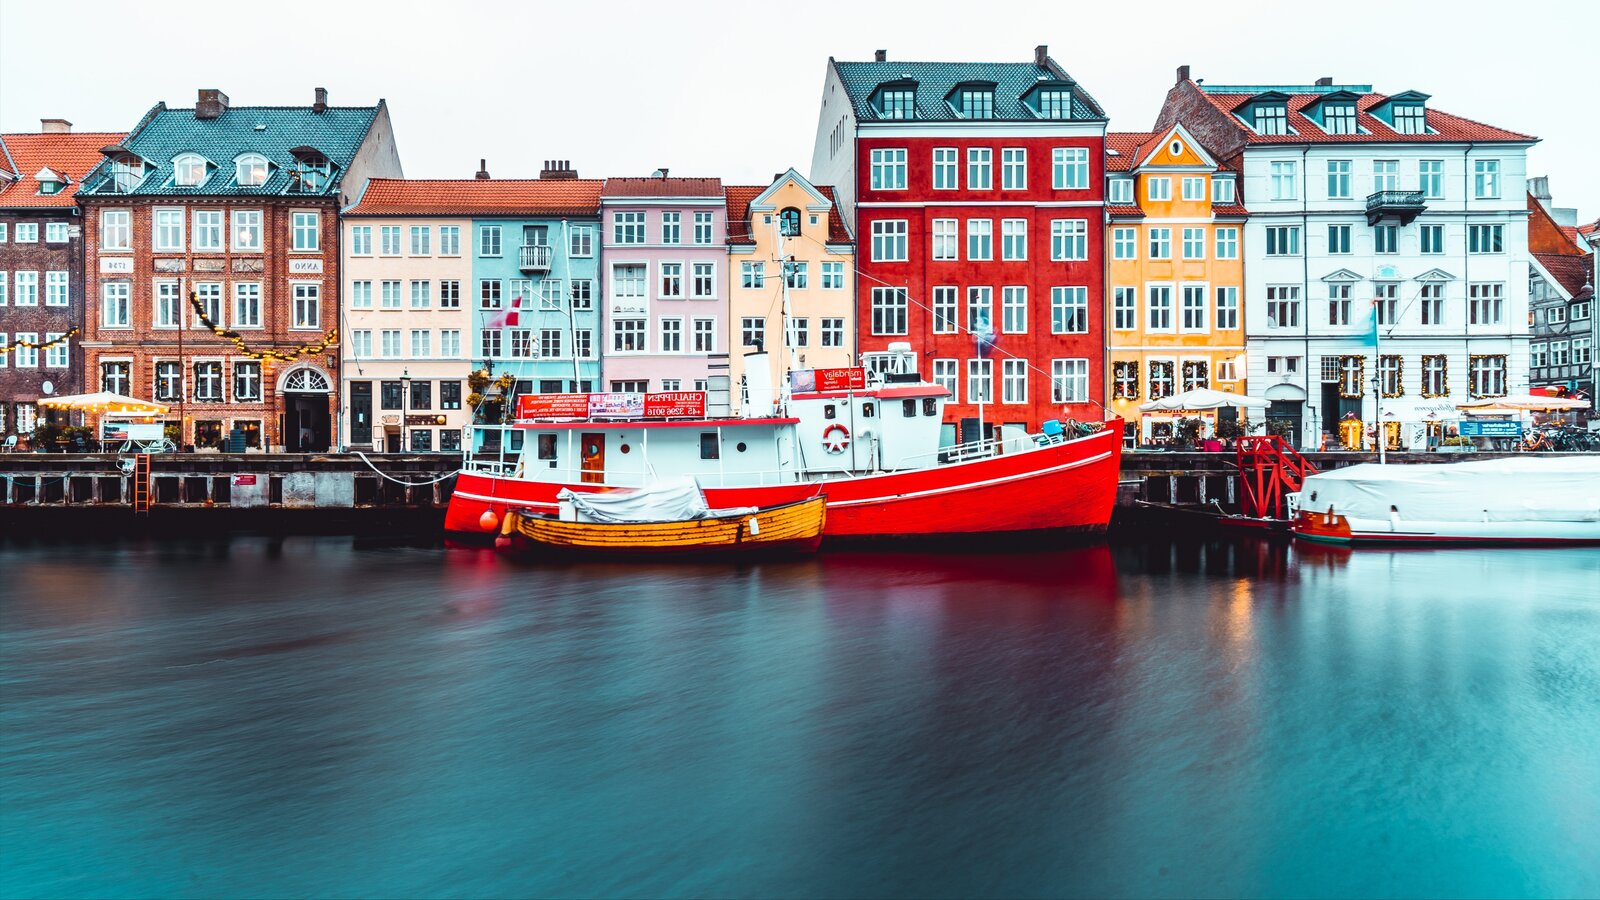 How to Obtain a Residence Permit in Denmark